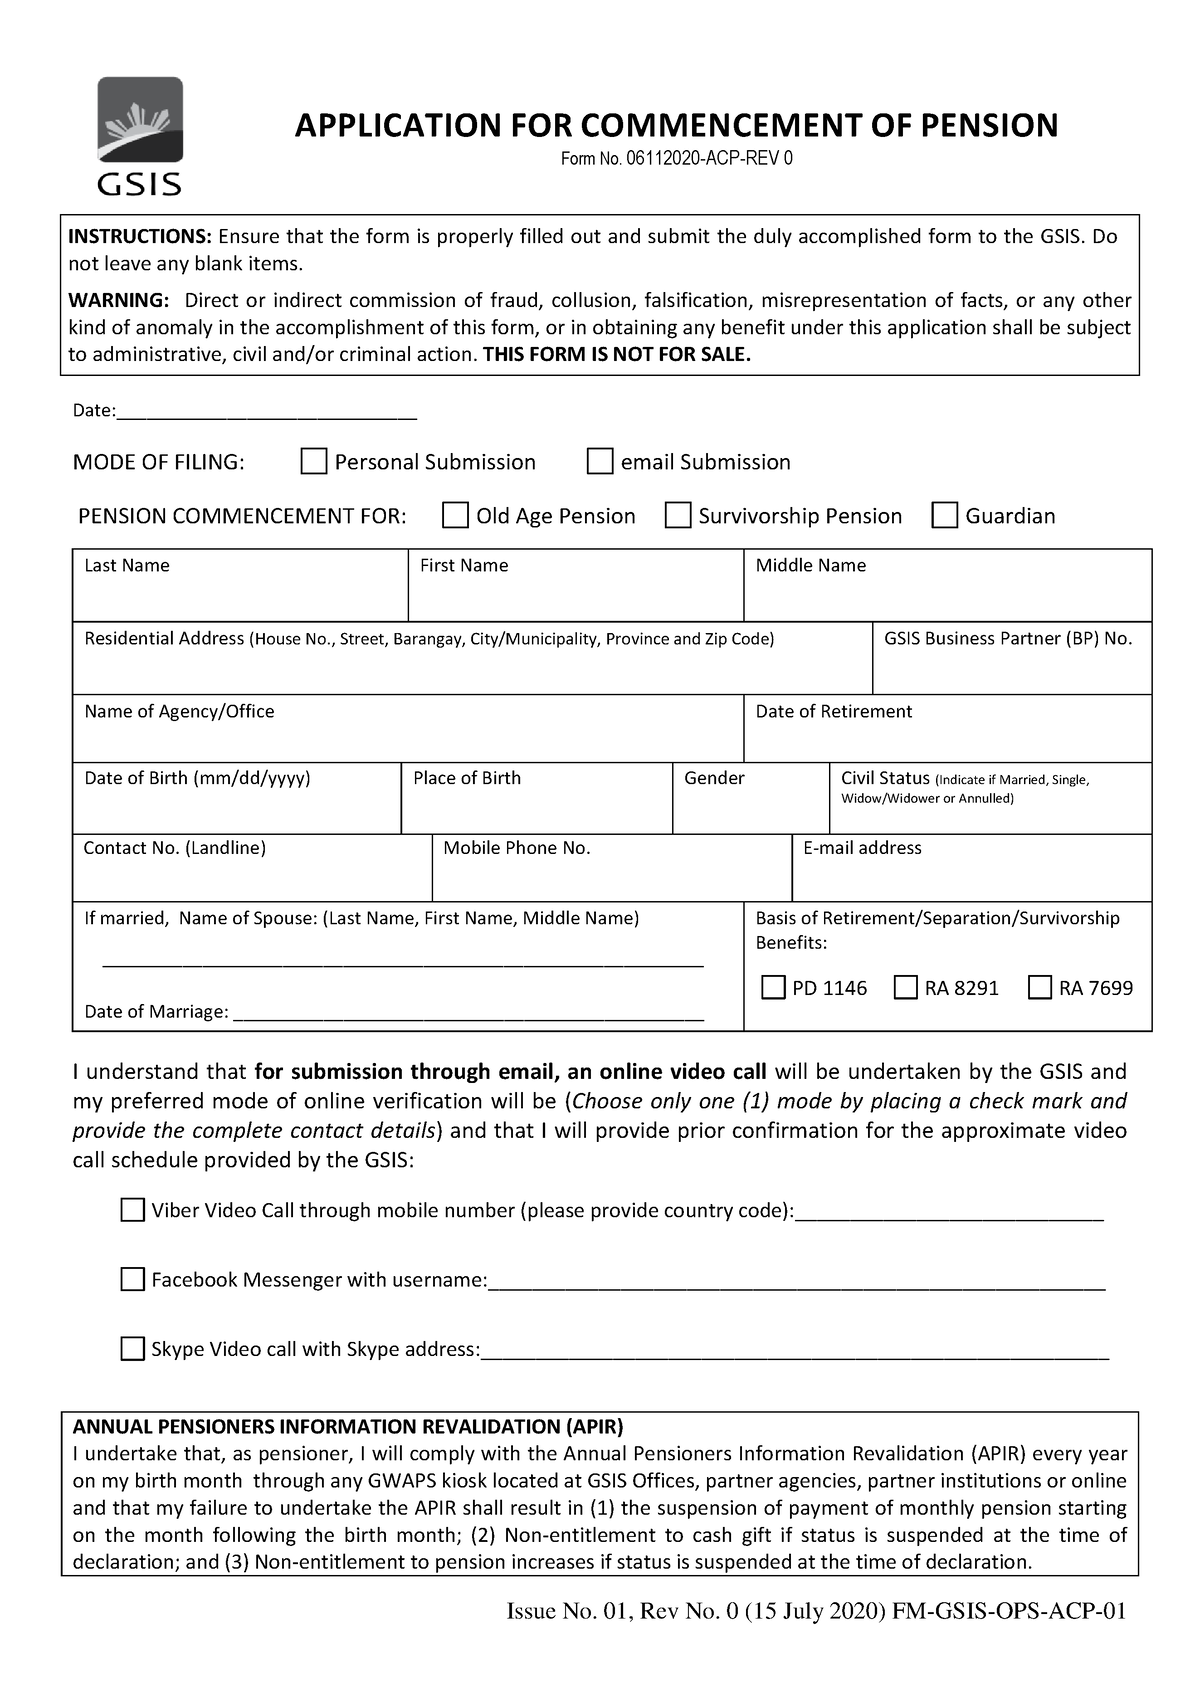 202007 29 Forms Application Commencement Pension - Issue No. 01, Rev No ...